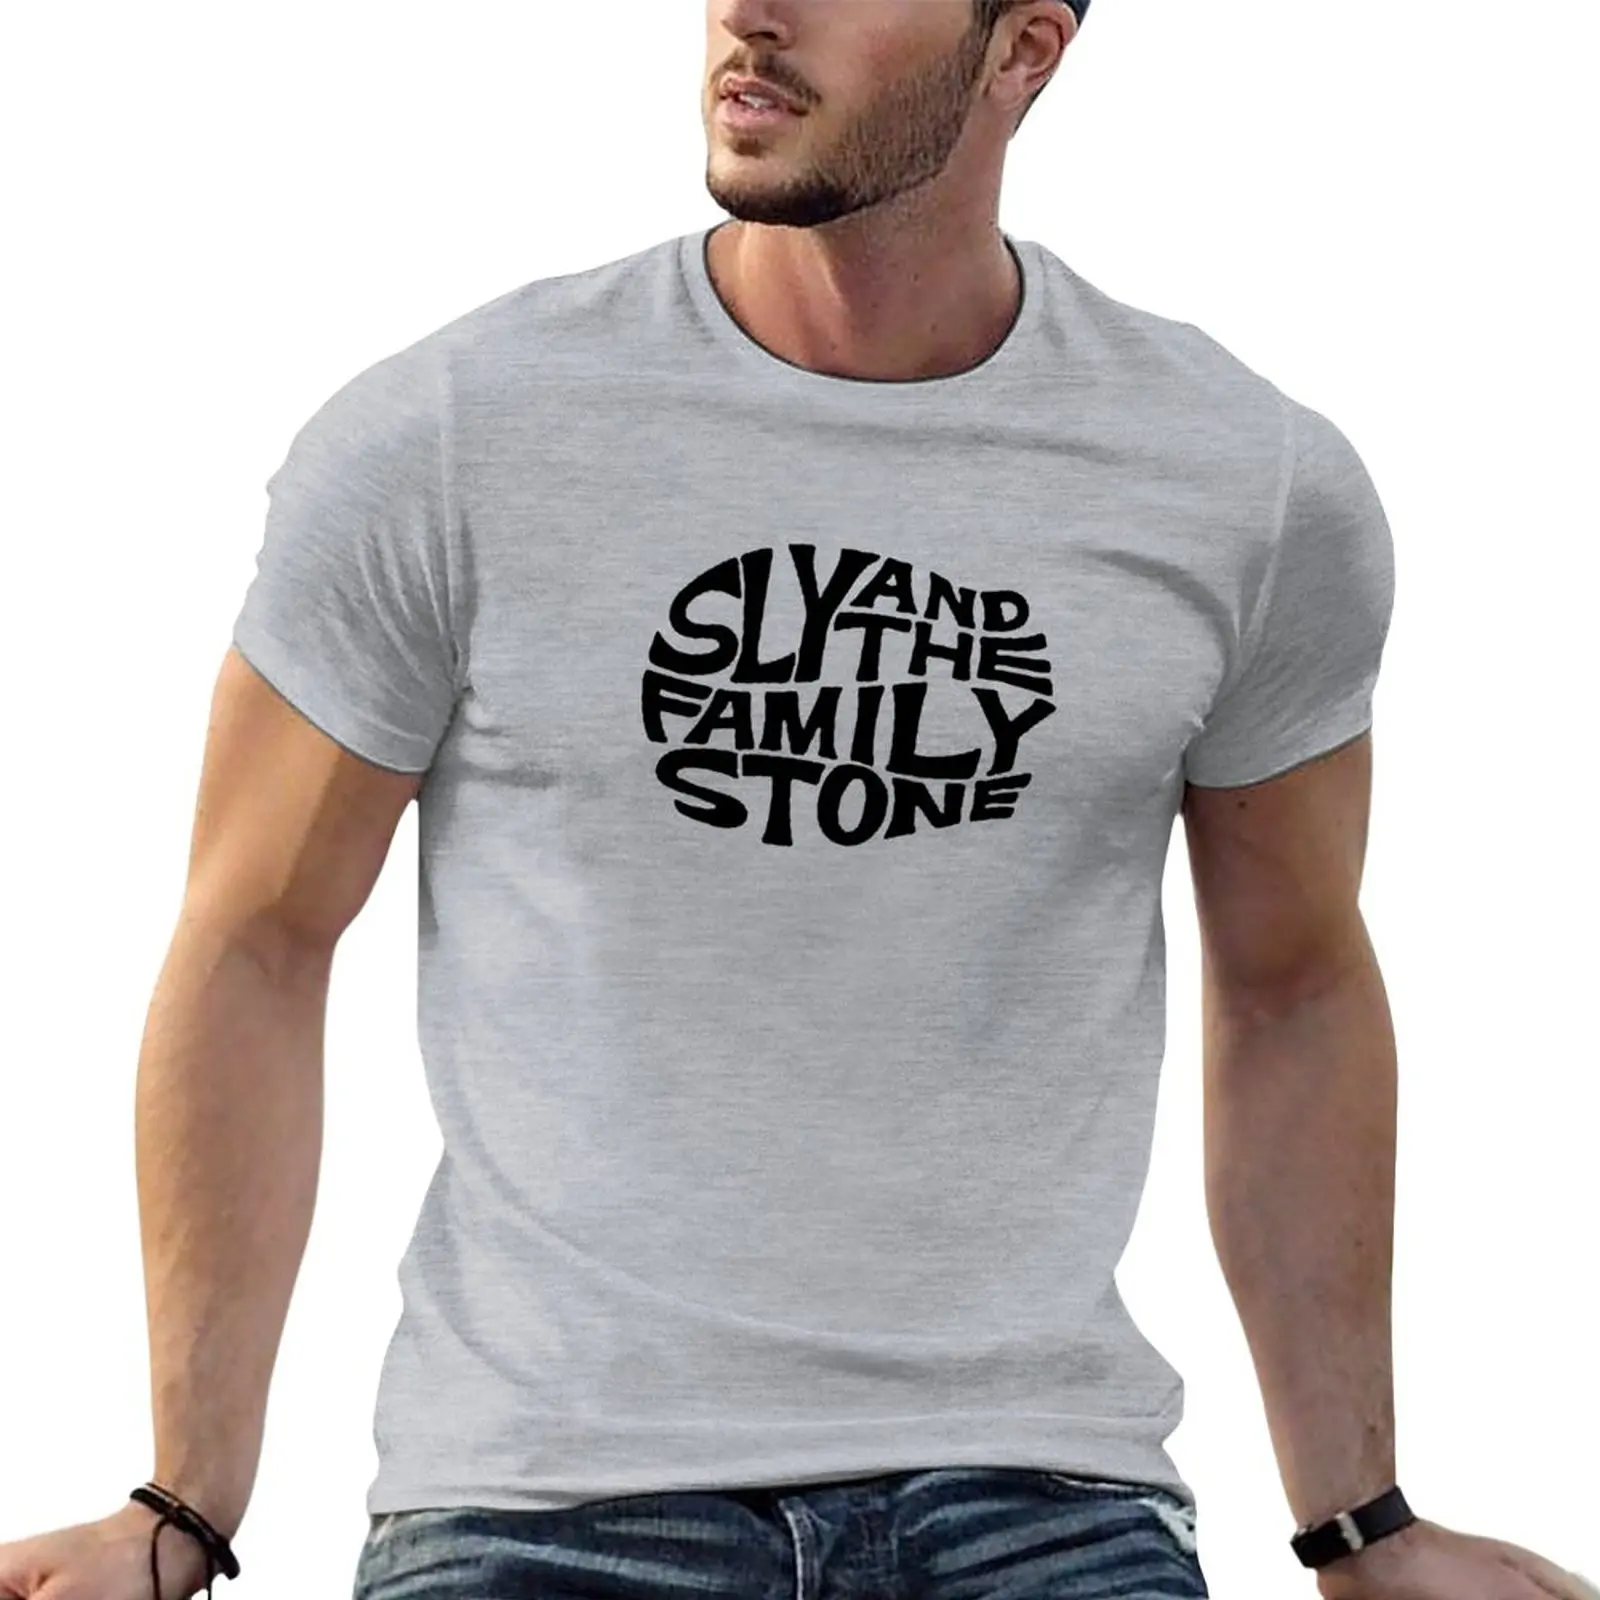 New Sly and the Family Stone T-Shirt summer tops cute tops shirts graphic tees black t-shirts for men leisure ned the time traveller tshirt anime valentine day tops shirts prevalent crew neck daily tops tees